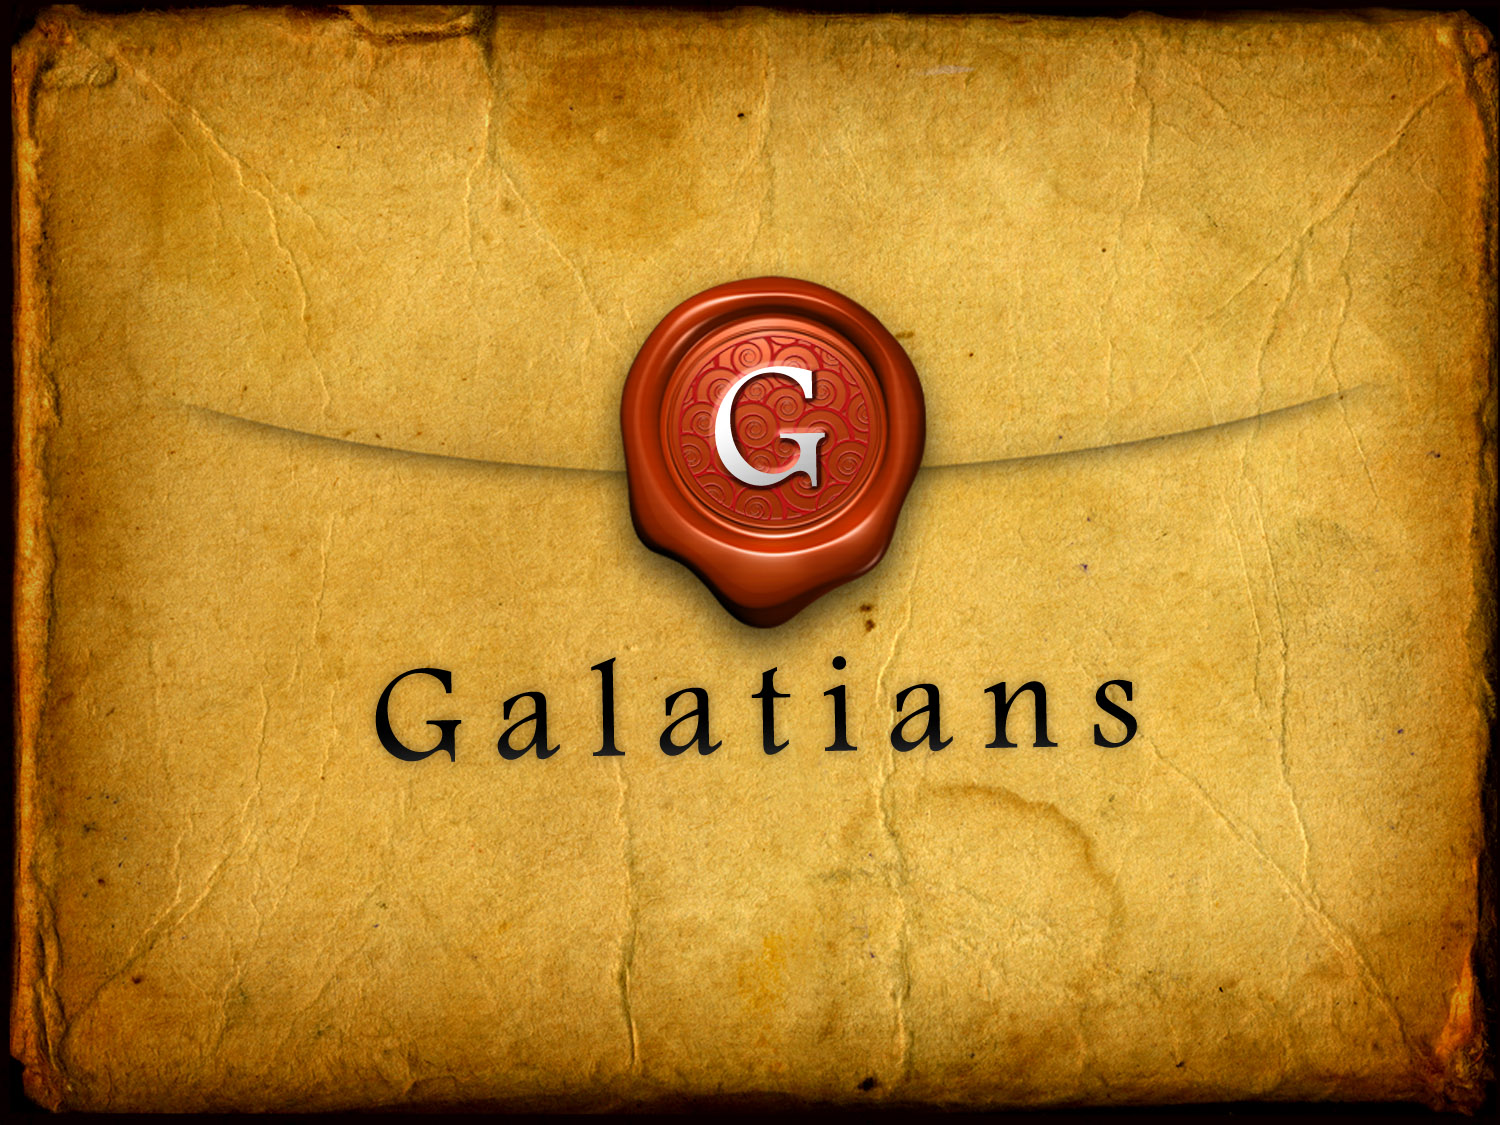 The Book of Galatians 1:6-9